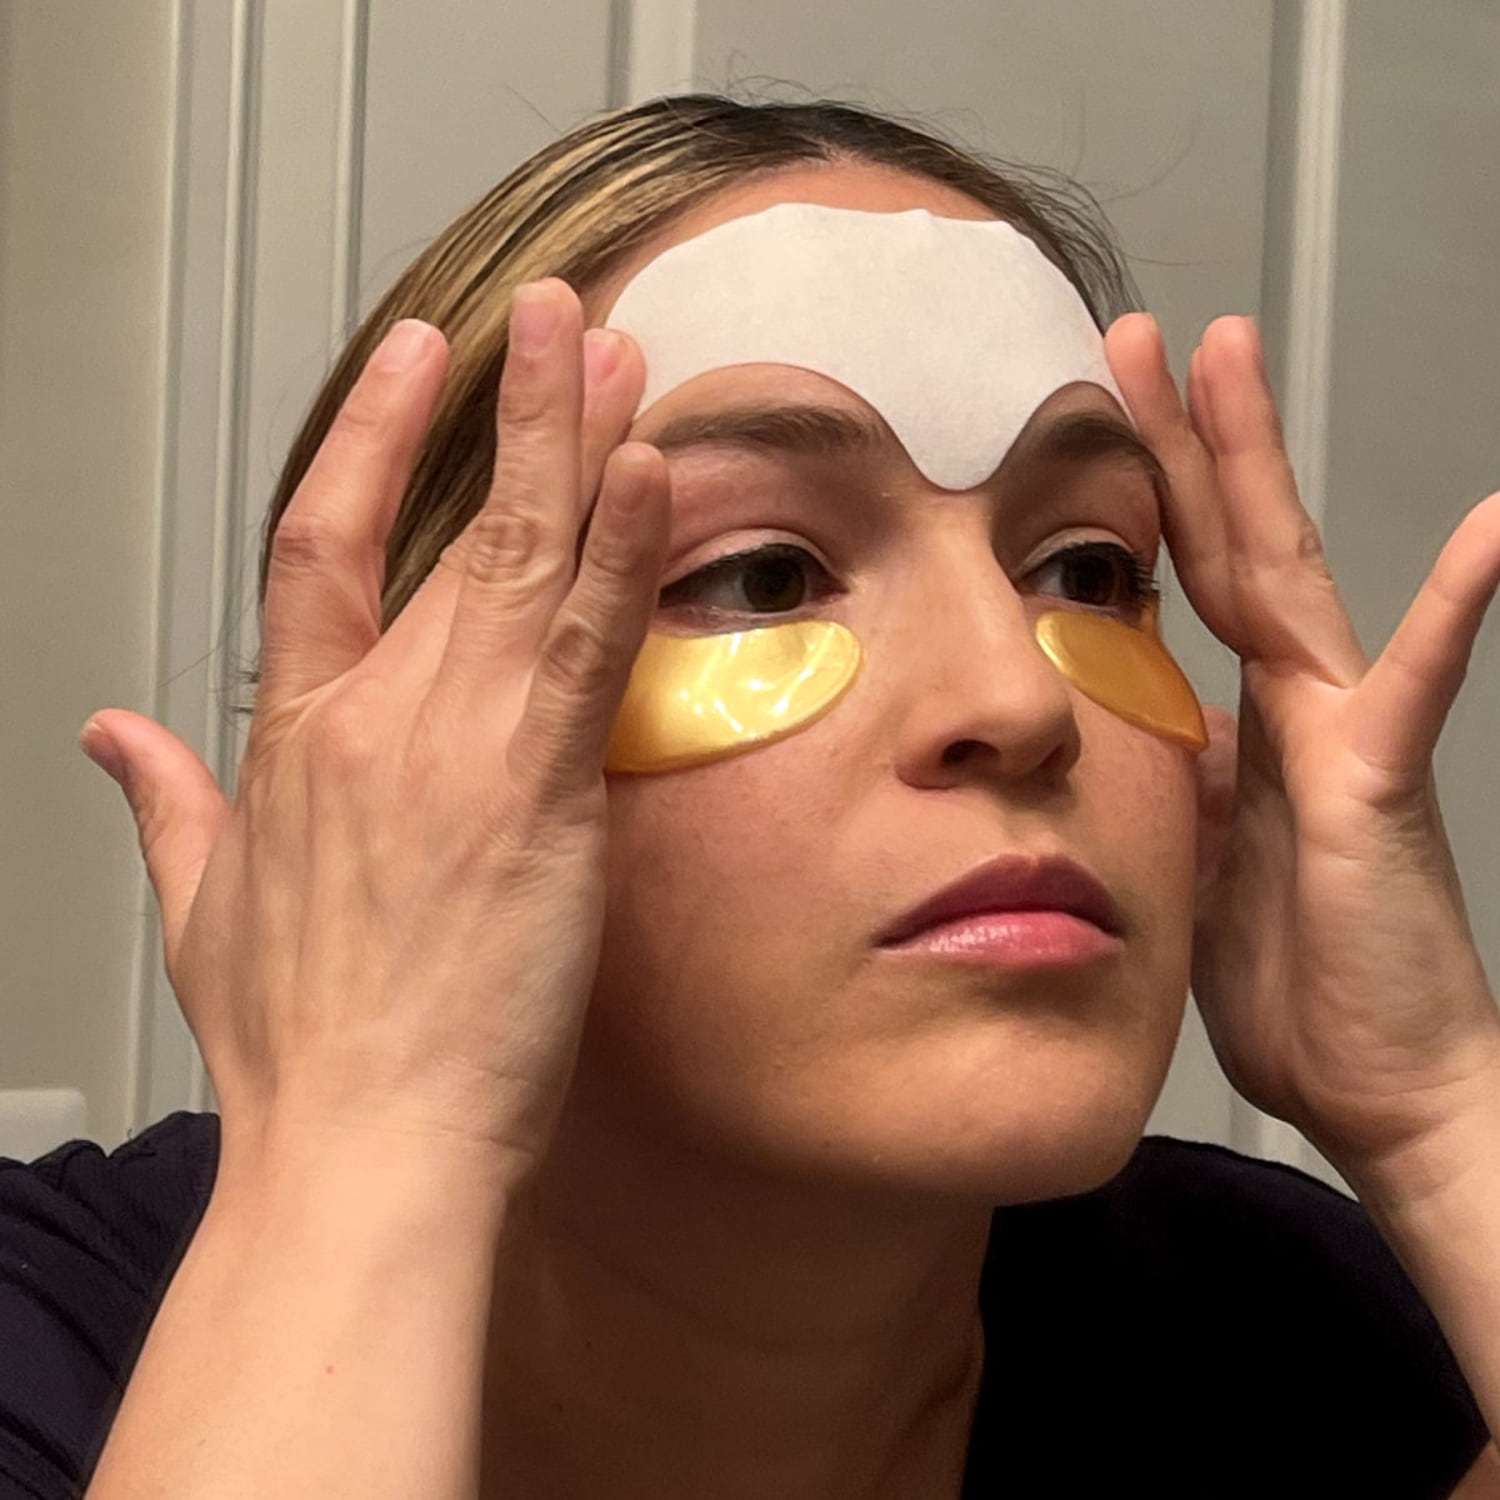 Do wrinkle patches really work?